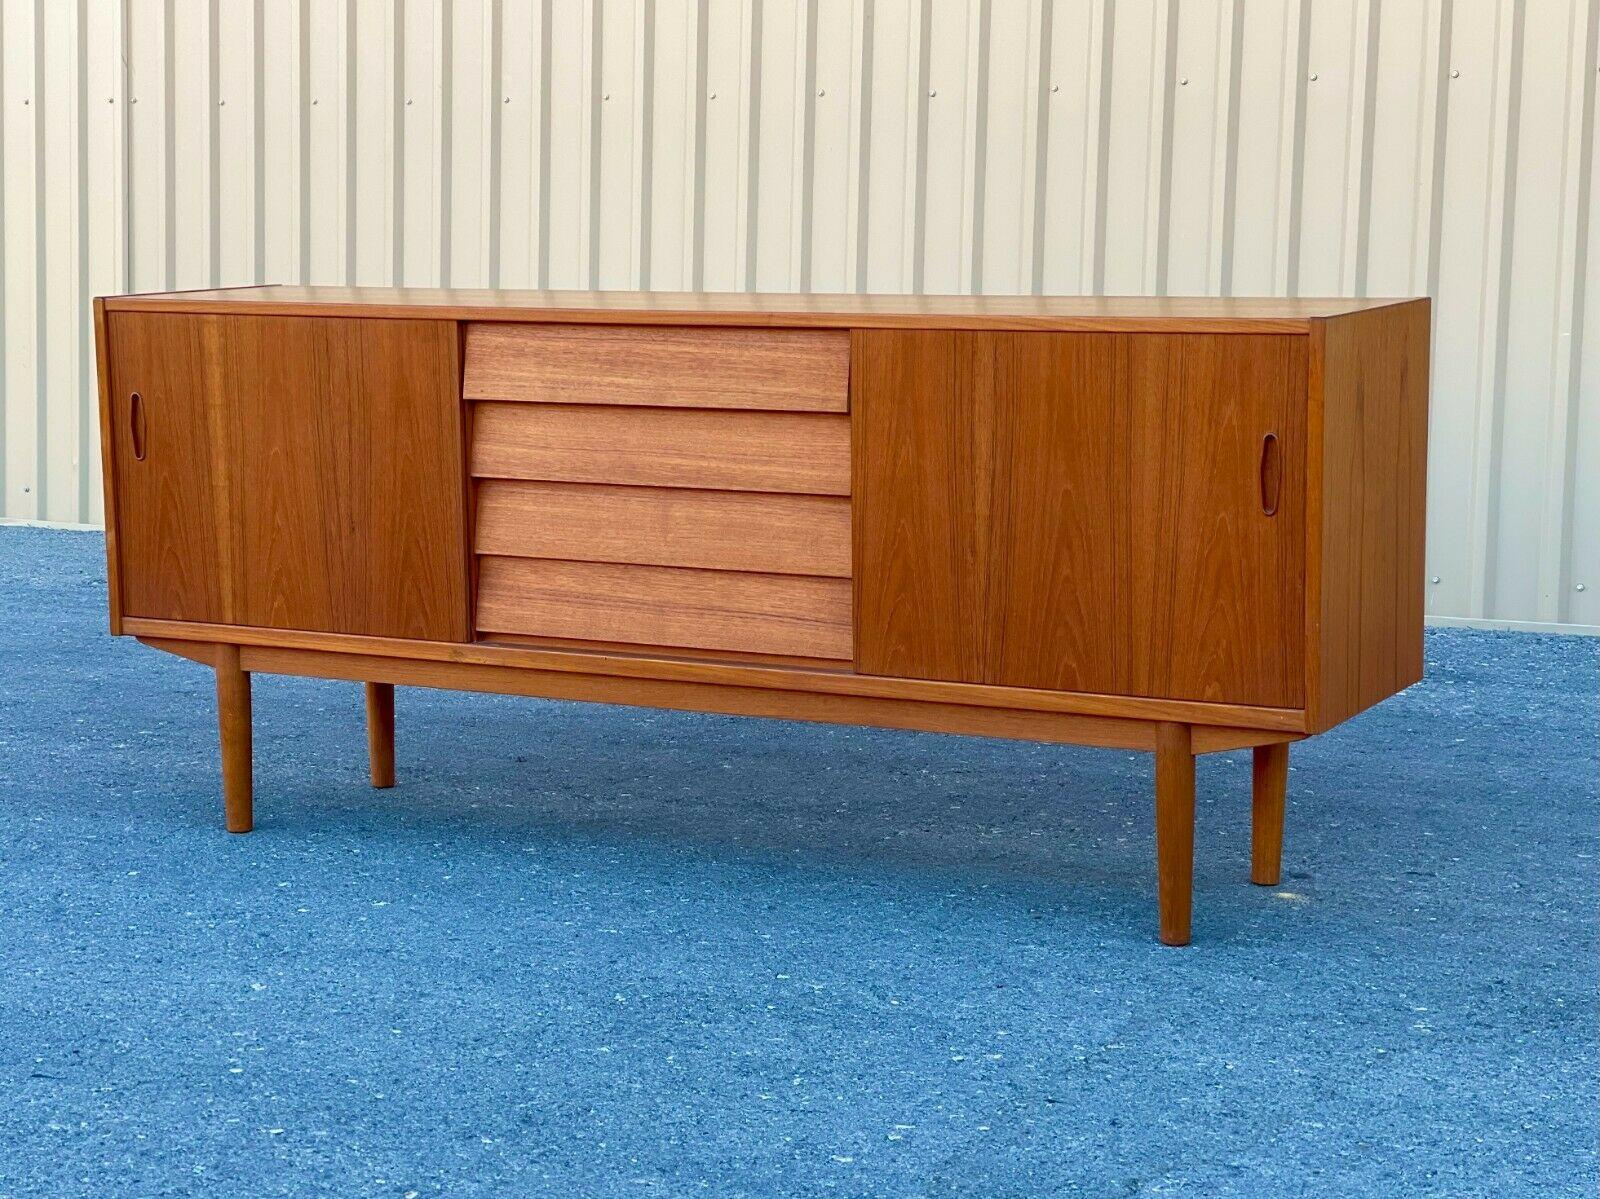 Lovely teak sideboard by Nils Jonsson for Hugo Troeds


Vintage teak mint condition sideboard featuring five drawers and two sliding doors with adjustable shelves. Elegant Danish Modern sideboard features storage for dining room or use as a